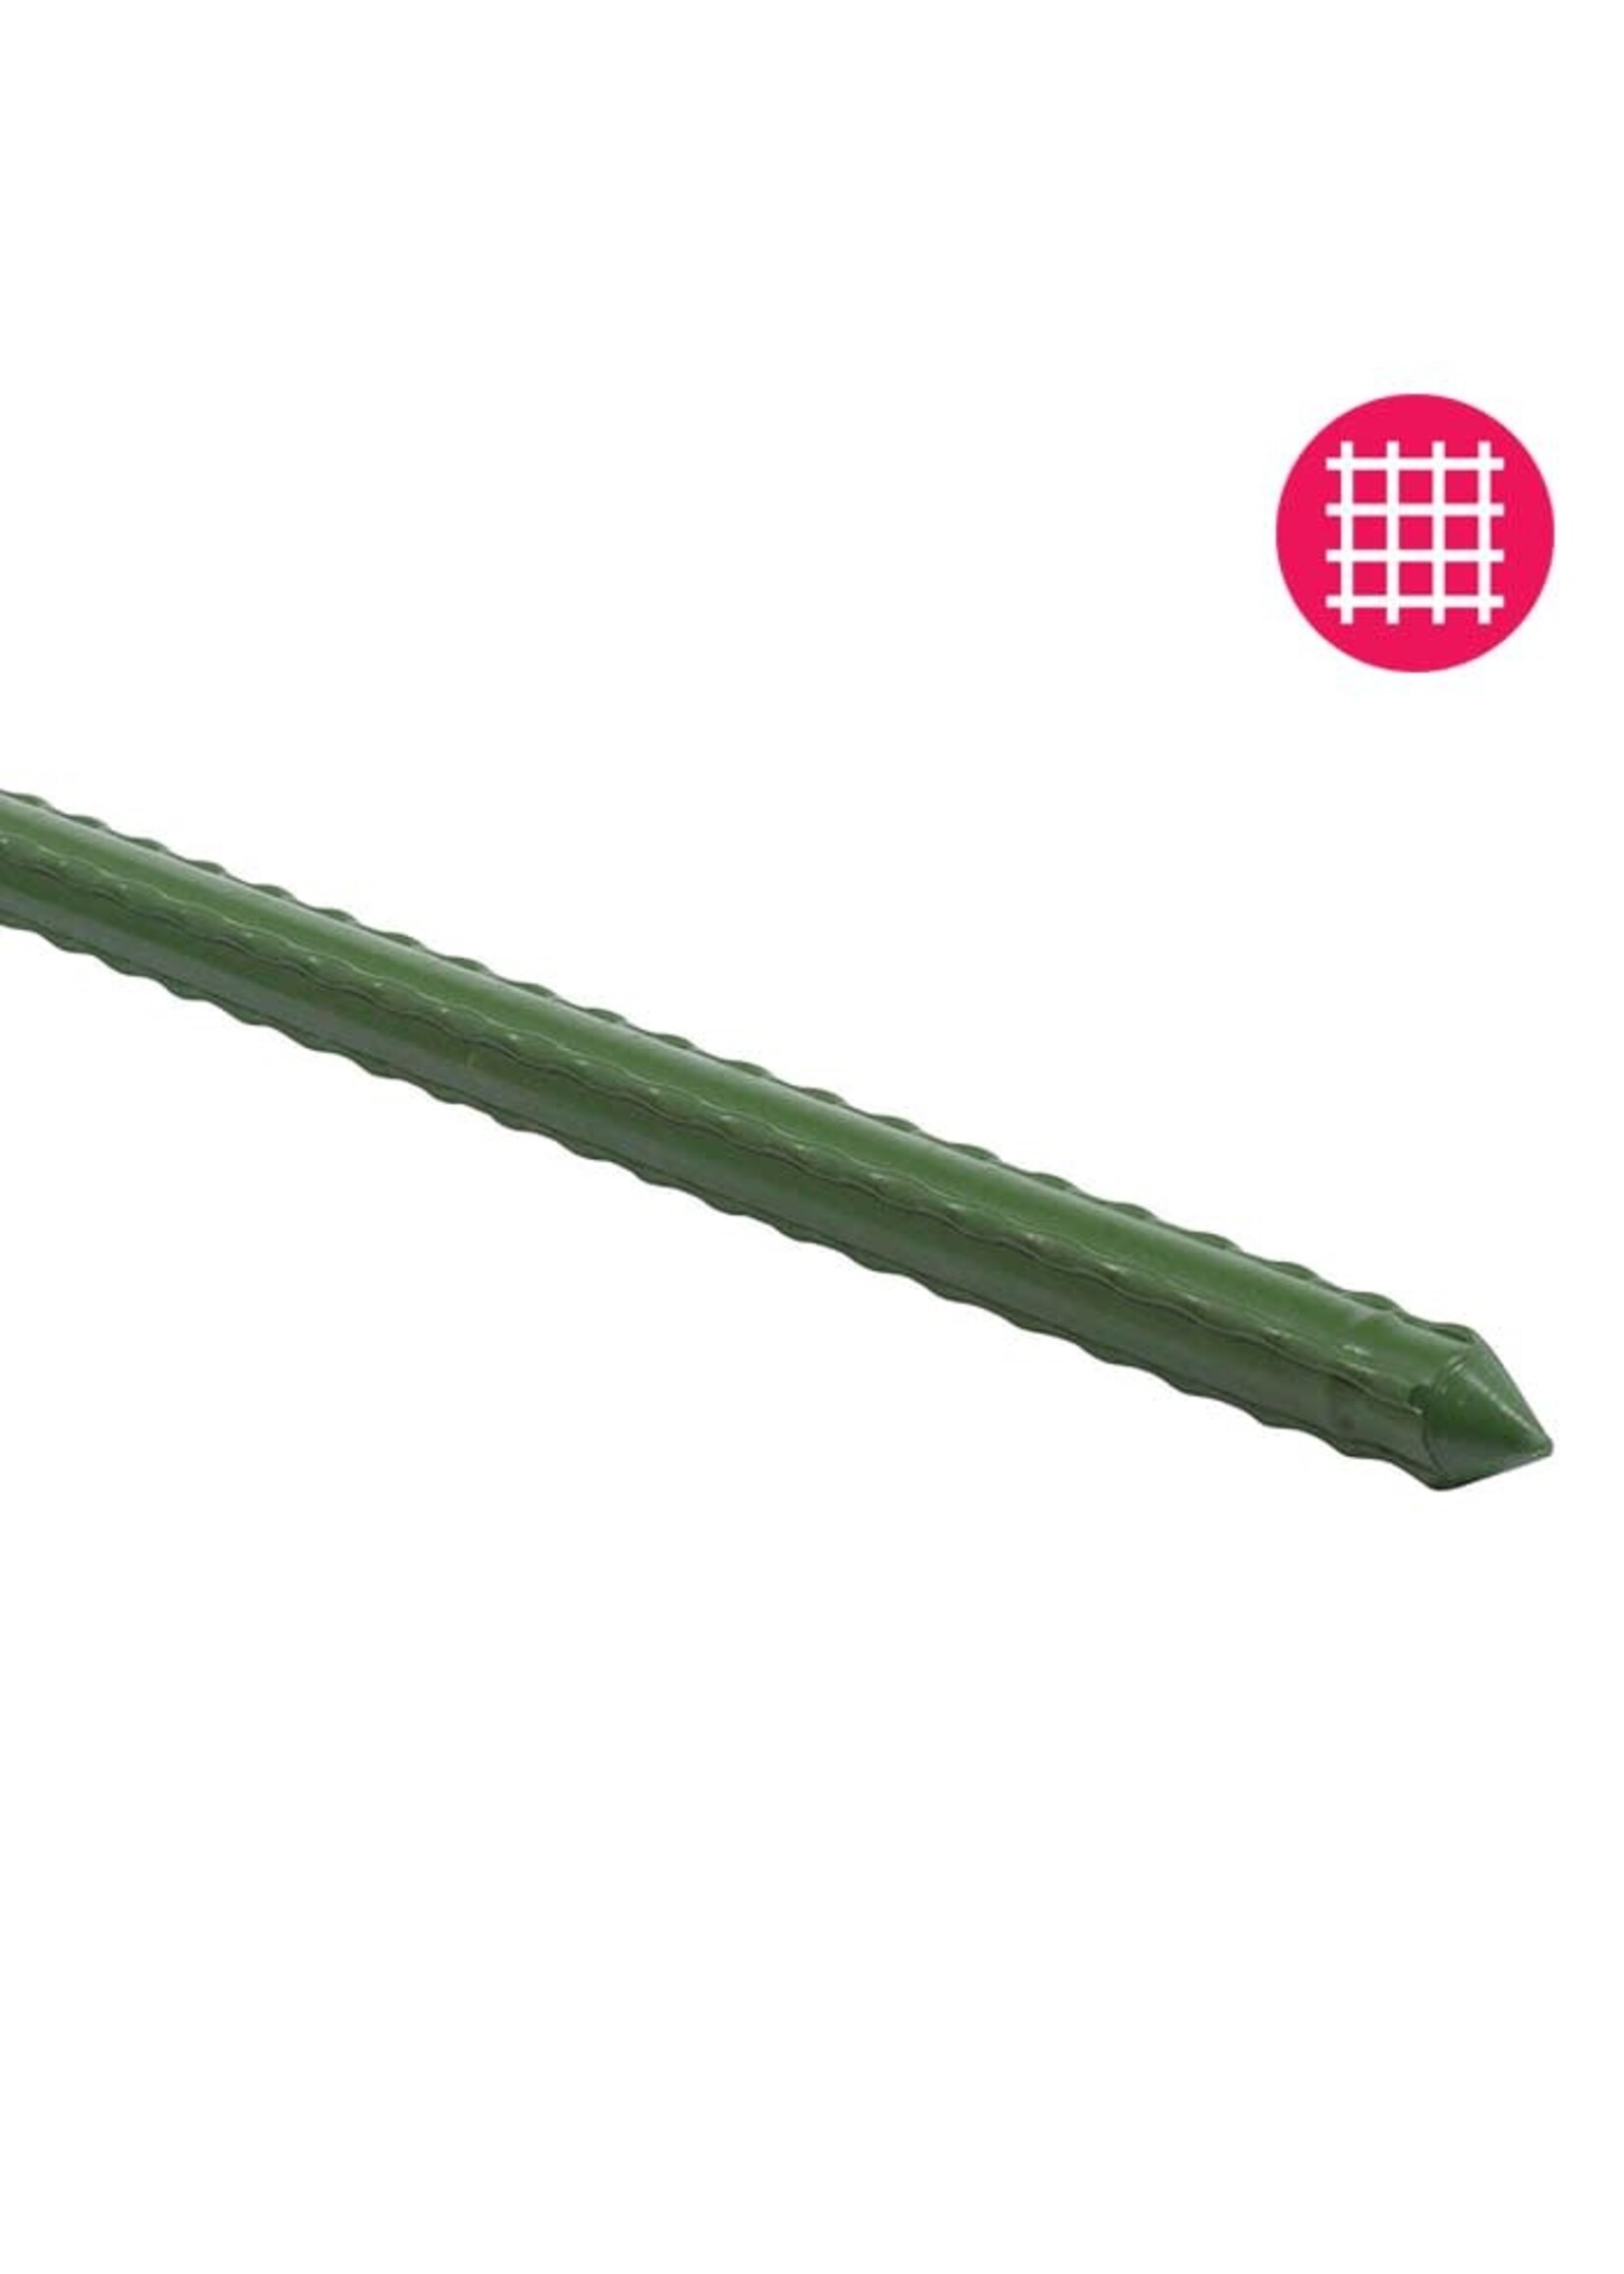 None 2' Steel Stake Plant Support - Green 20 pack - THIN